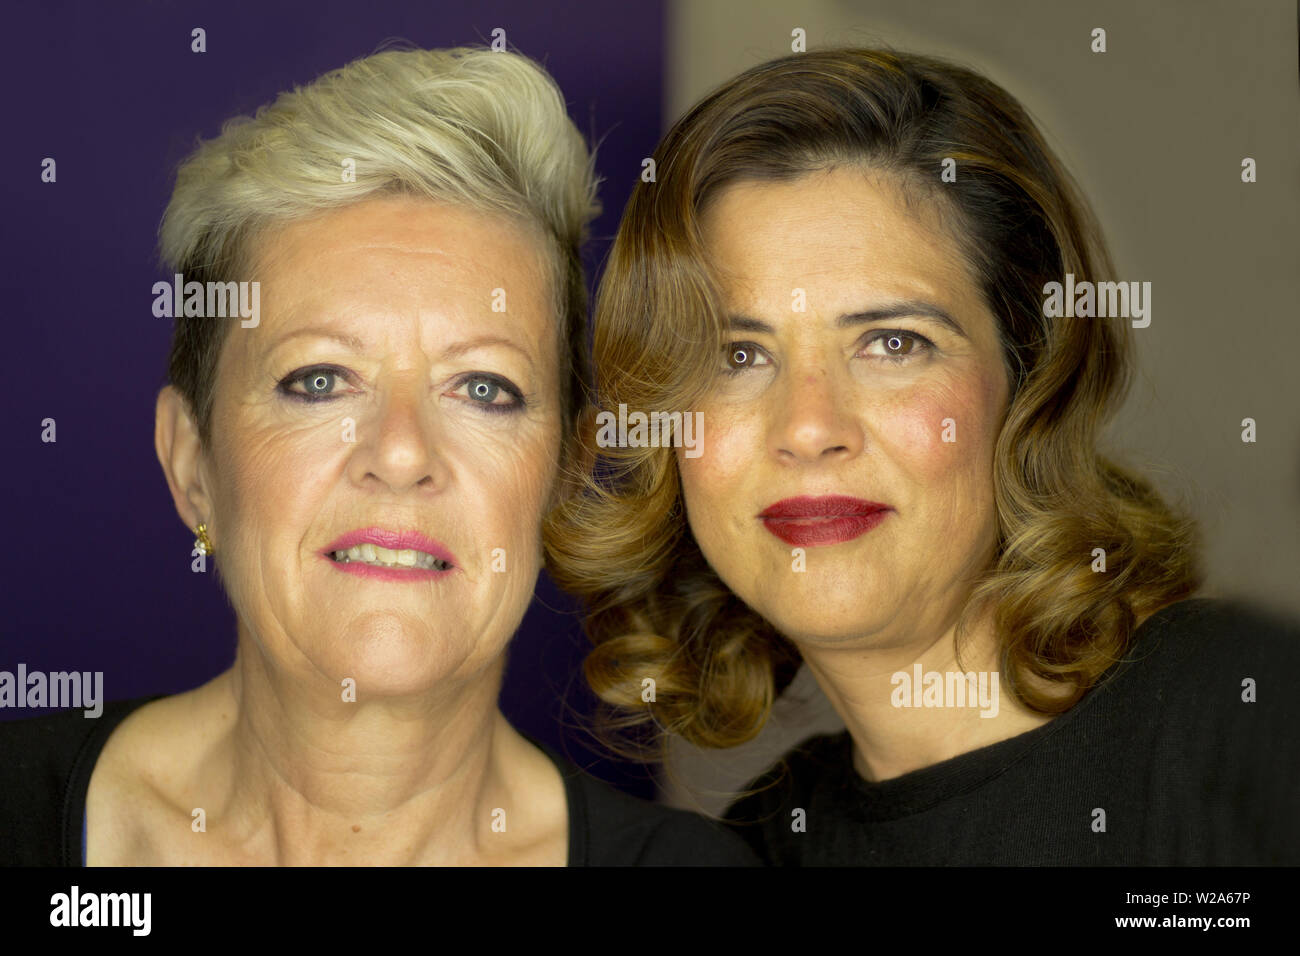 Woman With Platinum Blonde Short Hair And Woman With Wavy Brown